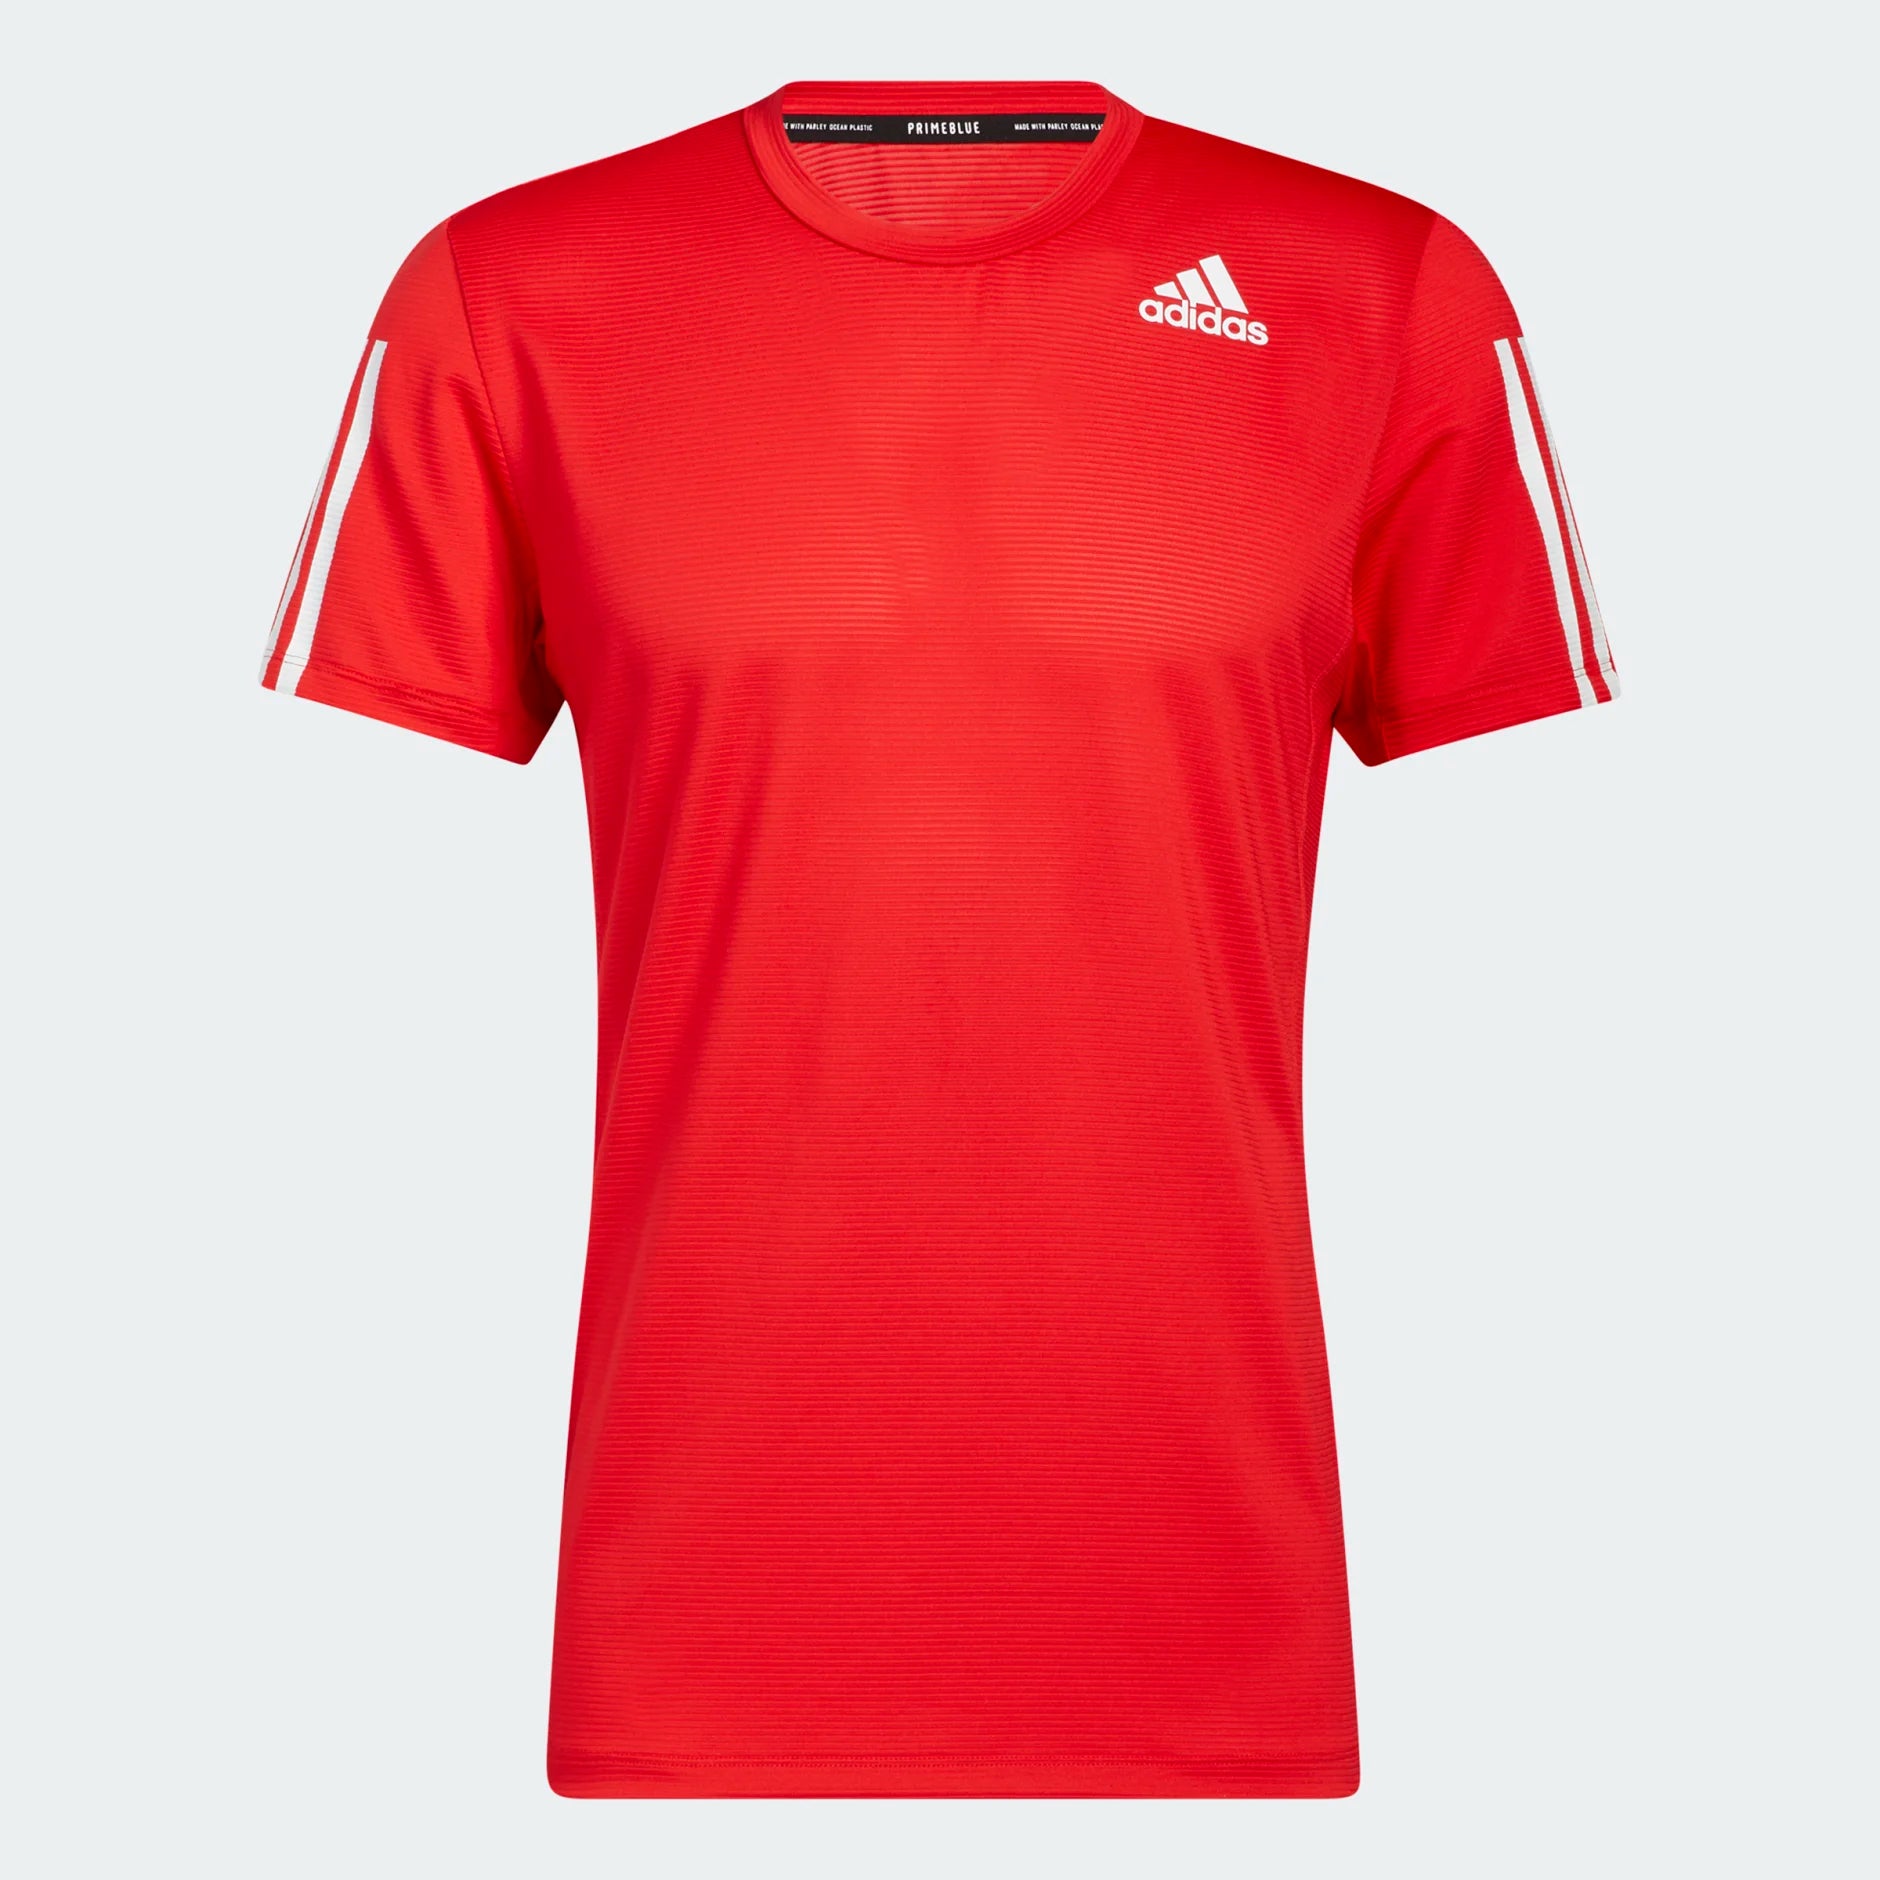 ADIDAS SALES COLLECTION Your 52 – - – Store bCODE Retail Online Page Fashion